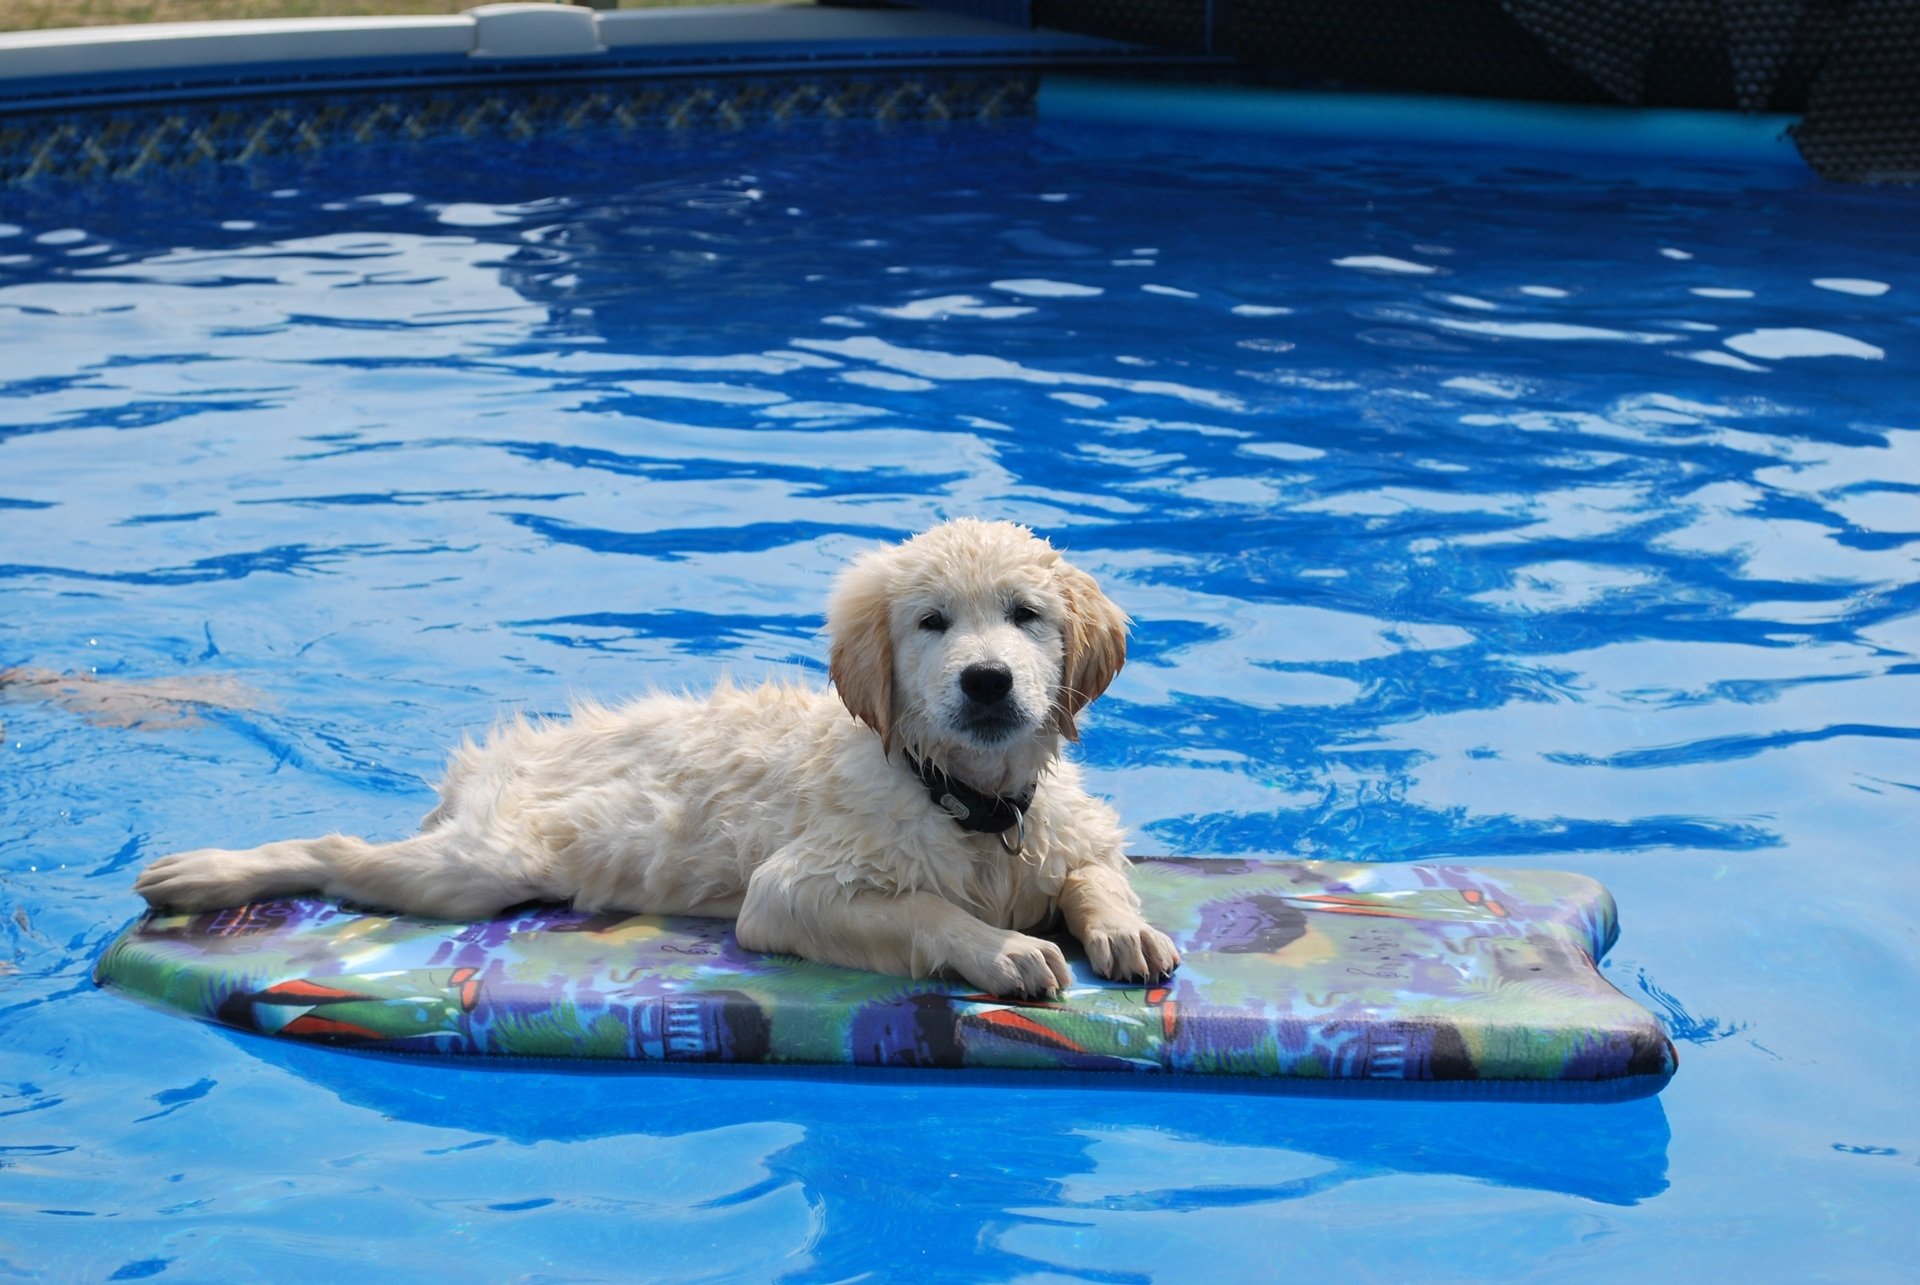 Puppy cooling off in the swimming pool by louisefy2